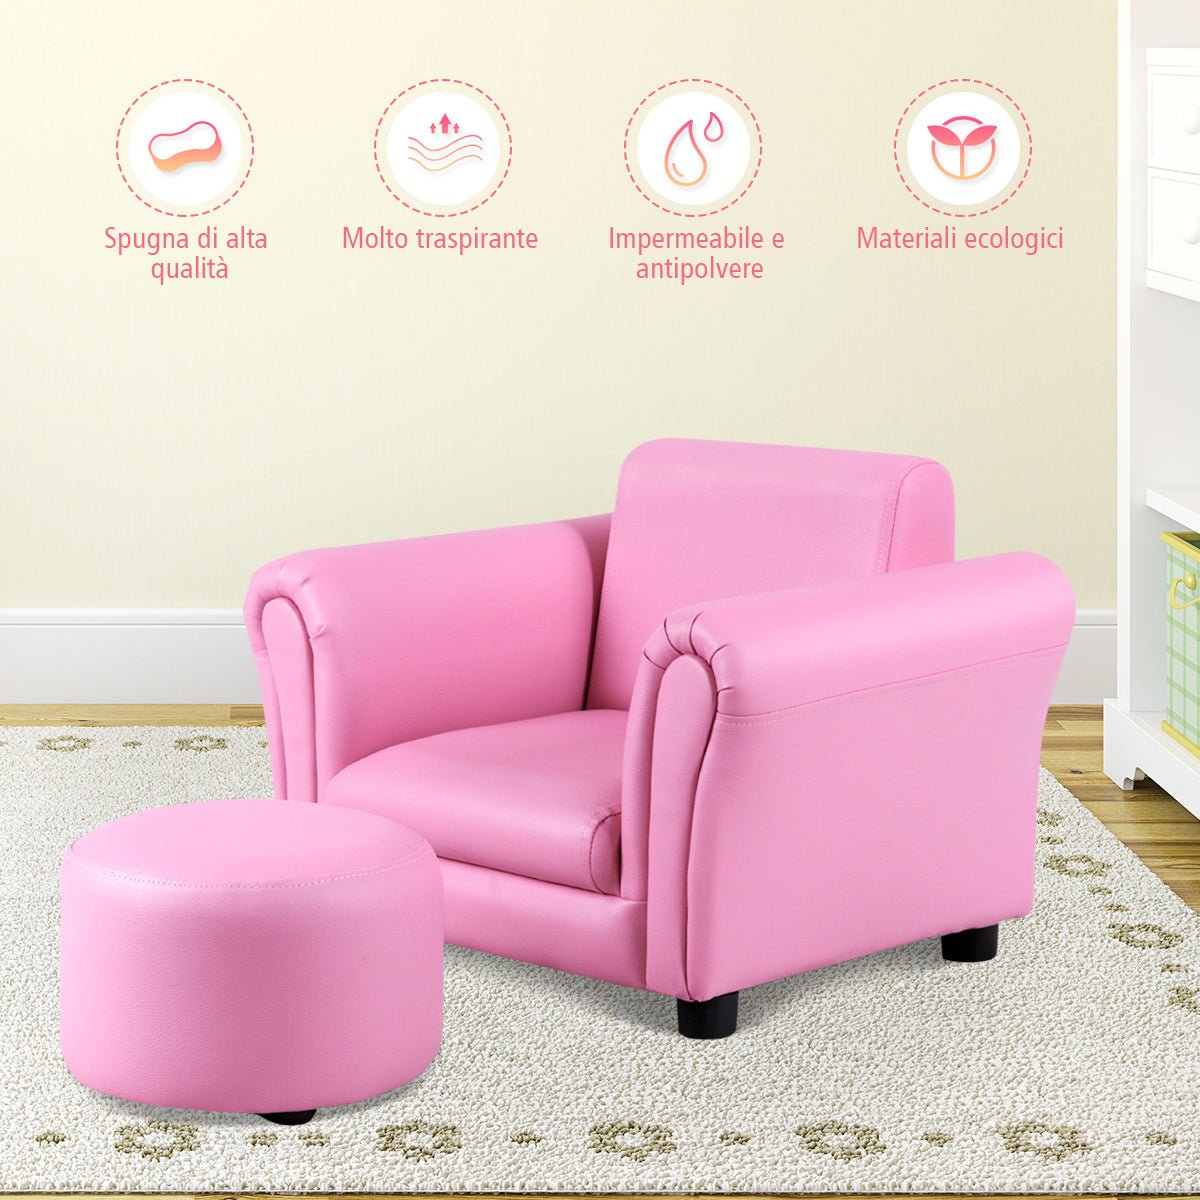 Ergonomic Sofa and Footstool Set - Comfort for Babies and Kids in Pink